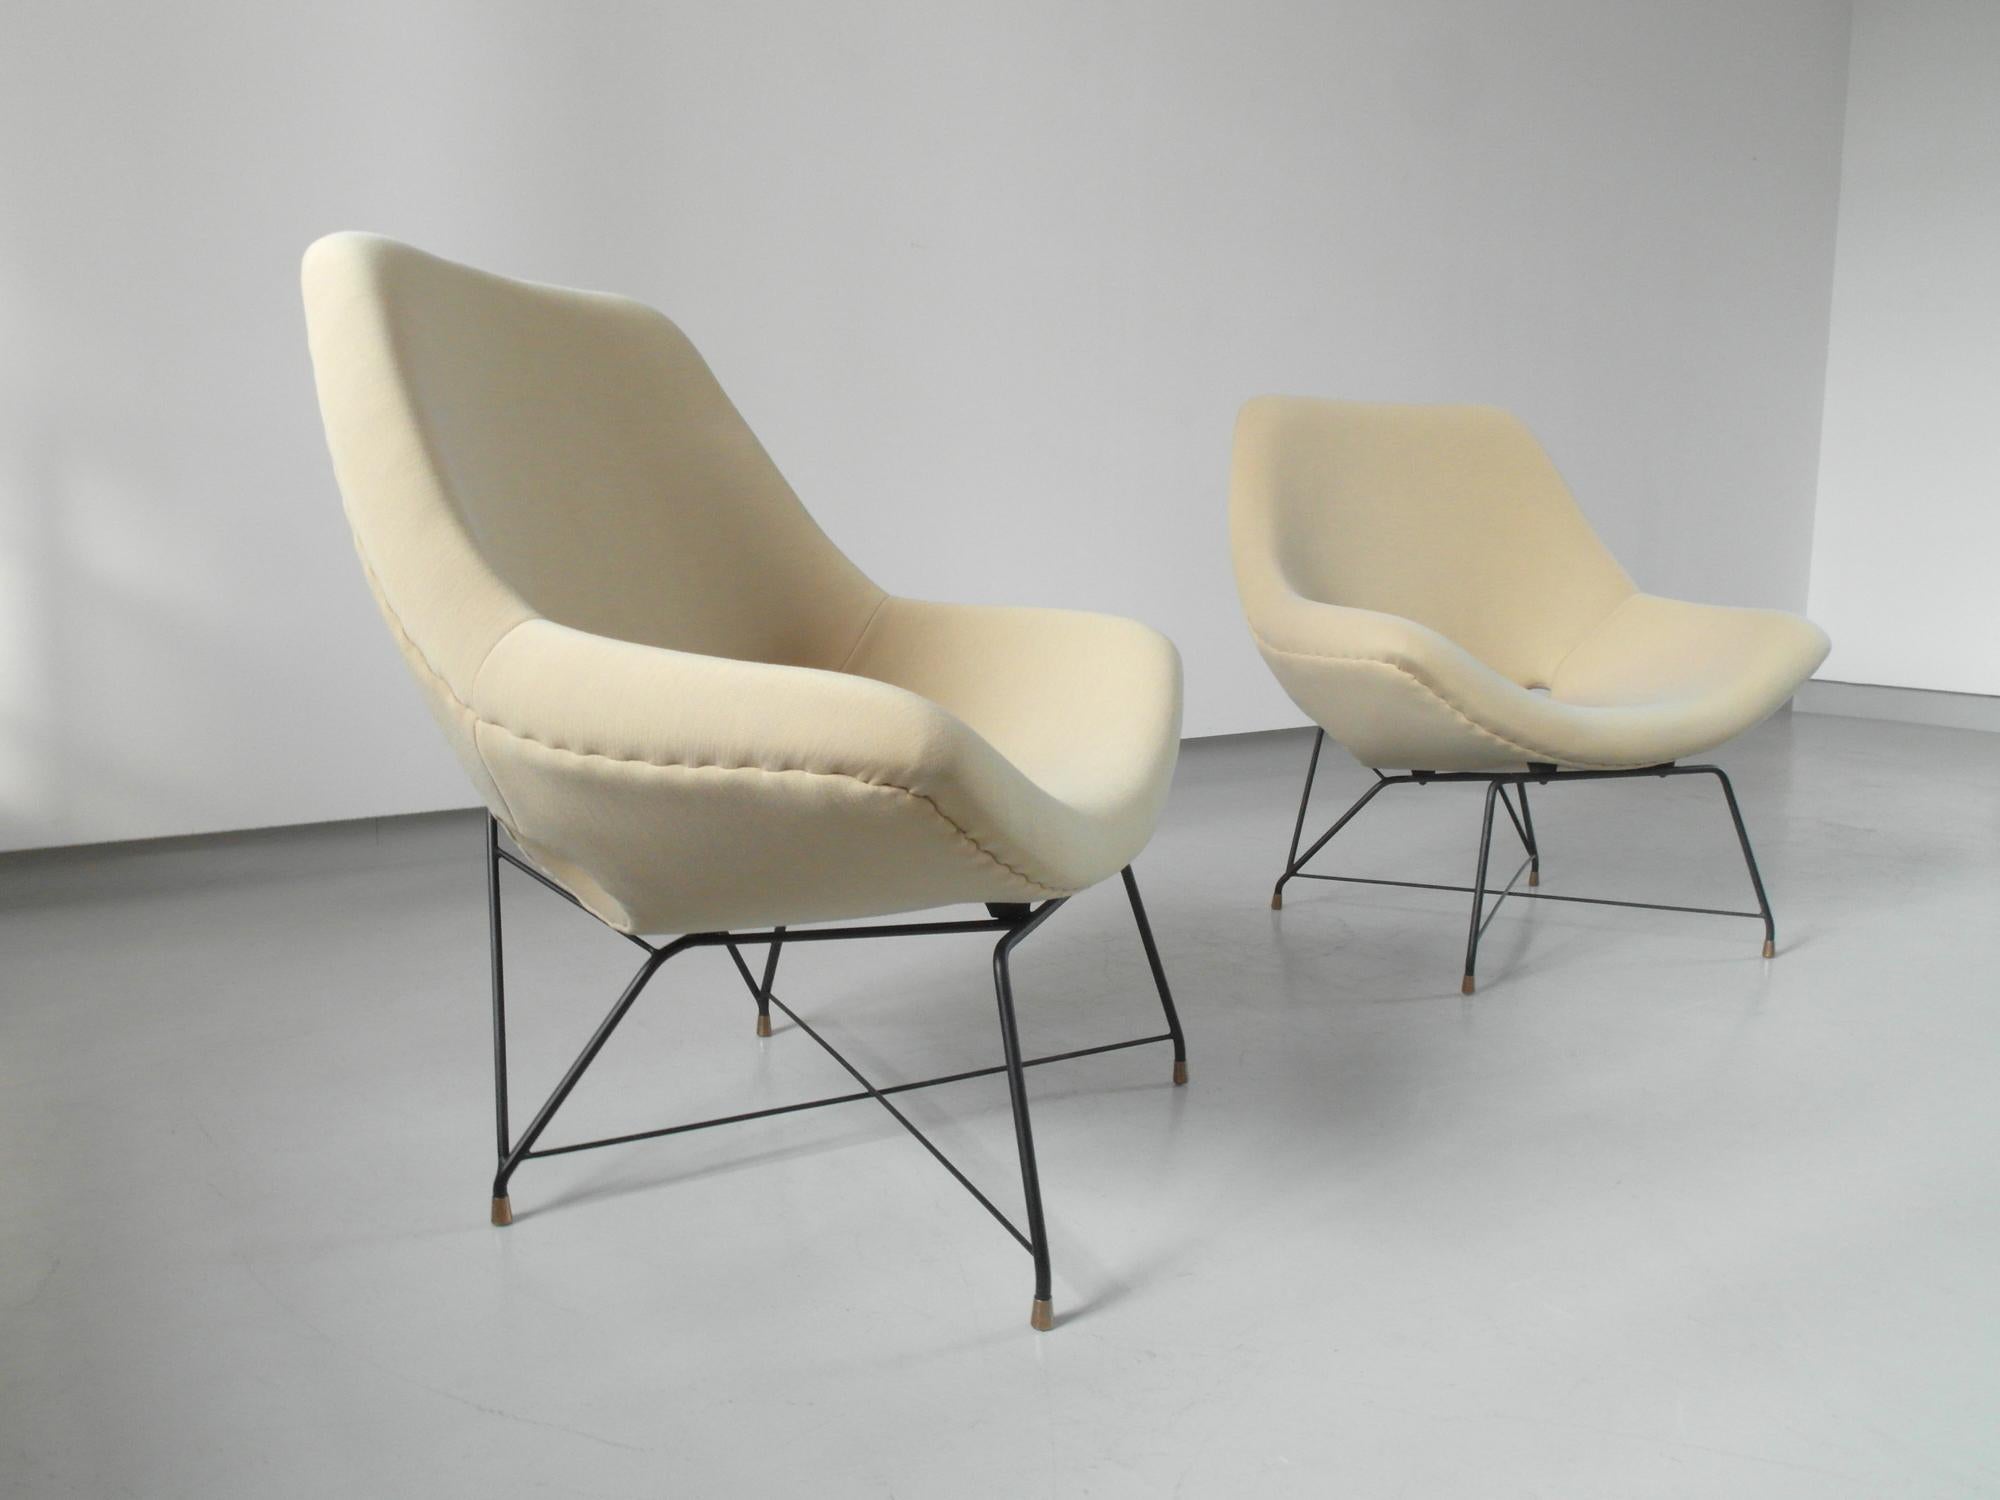 Sculptural Pair of Lounge Chairs by Augusto Bozzi for Saporiti, Italy, 1954 For Sale 7